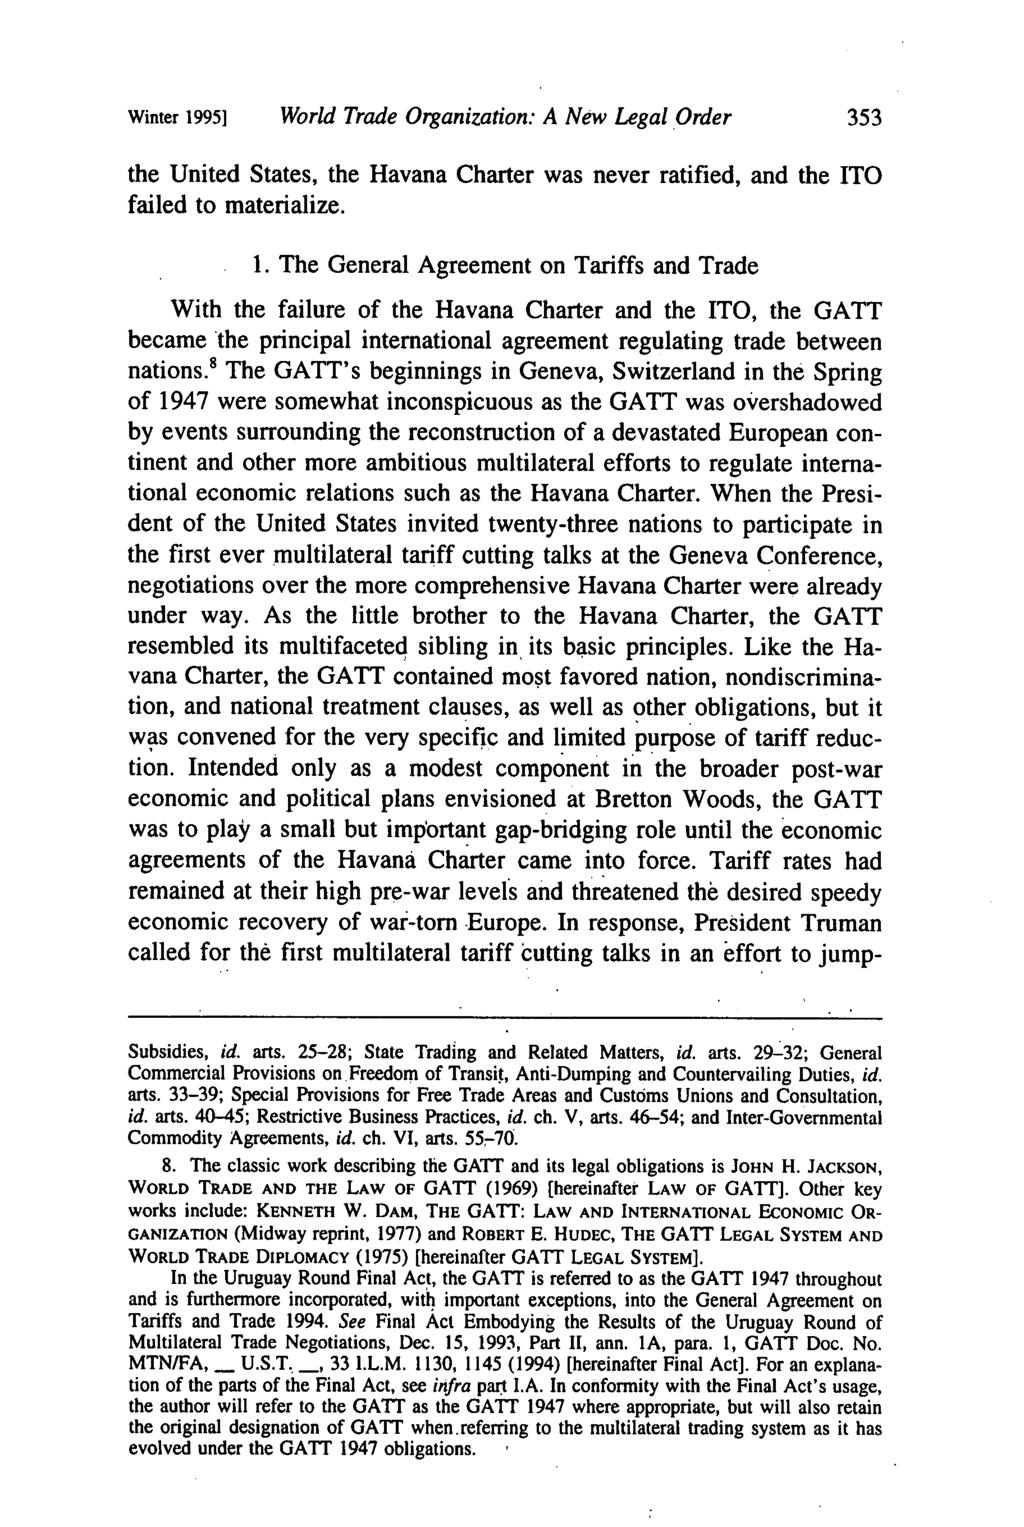 Winter 1995] World Trade Organization: A New Legal Order 353 the United States, the Havana Charter was never ratified, and the ITO failed to materialize. 1. The General Agreement on Tariffs and Trade With the failure of the Havana Charter and the ITO, the GATT became the principal international agreement regulating trade between nations.